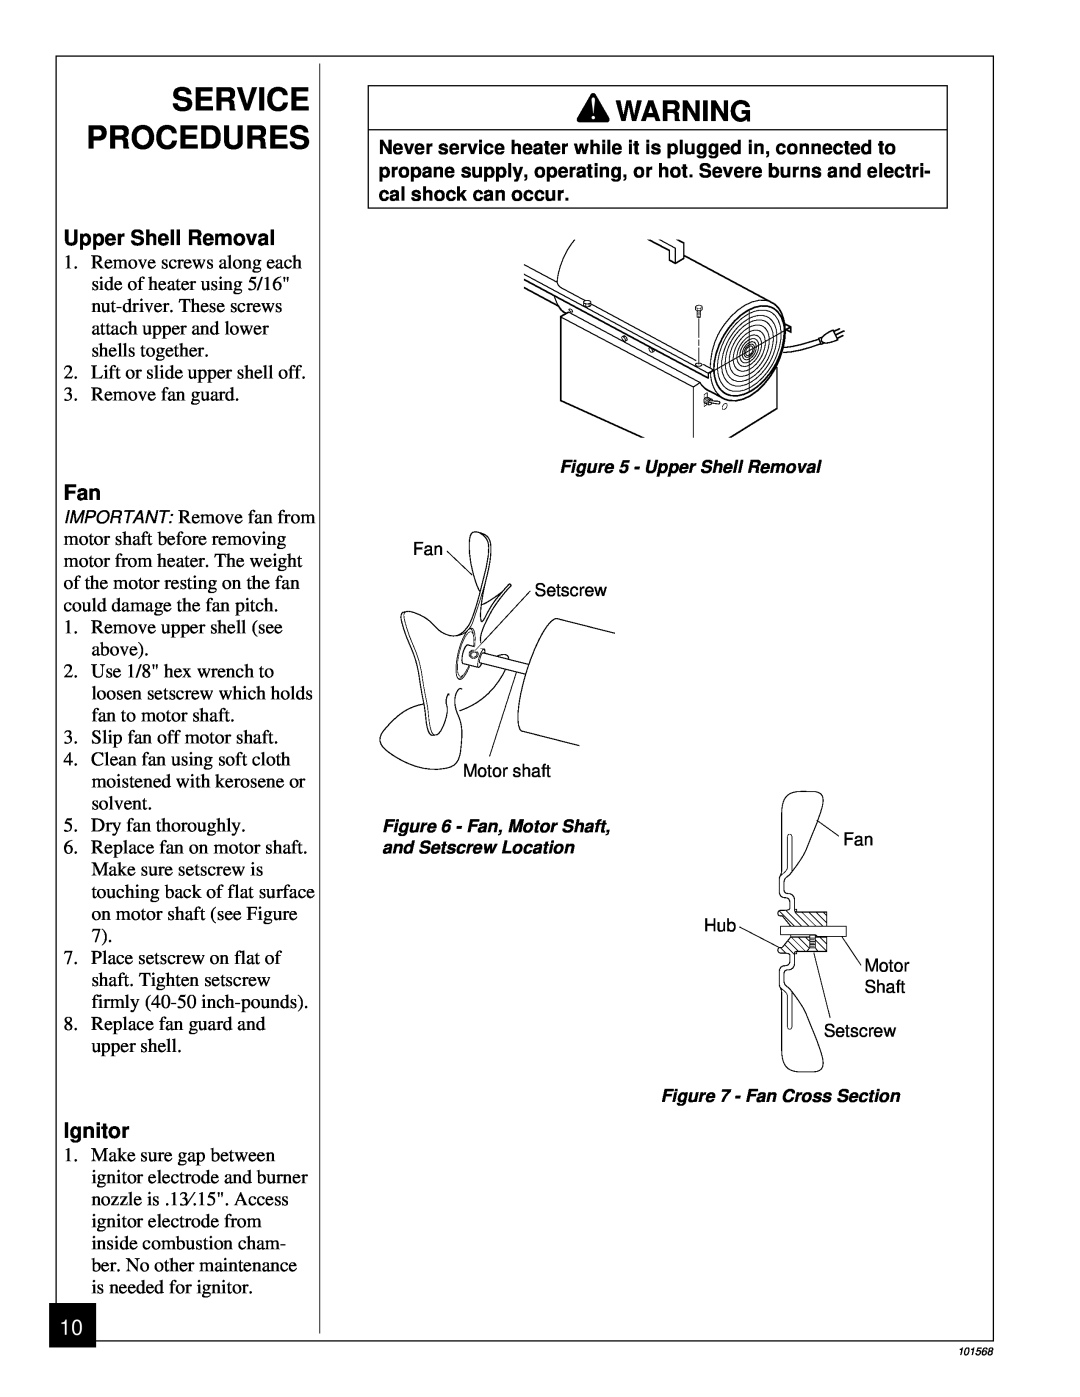 Homelite UT65052-A, HP155A owner manual Service Procedures, Upper Shell Removal, Ignitor 